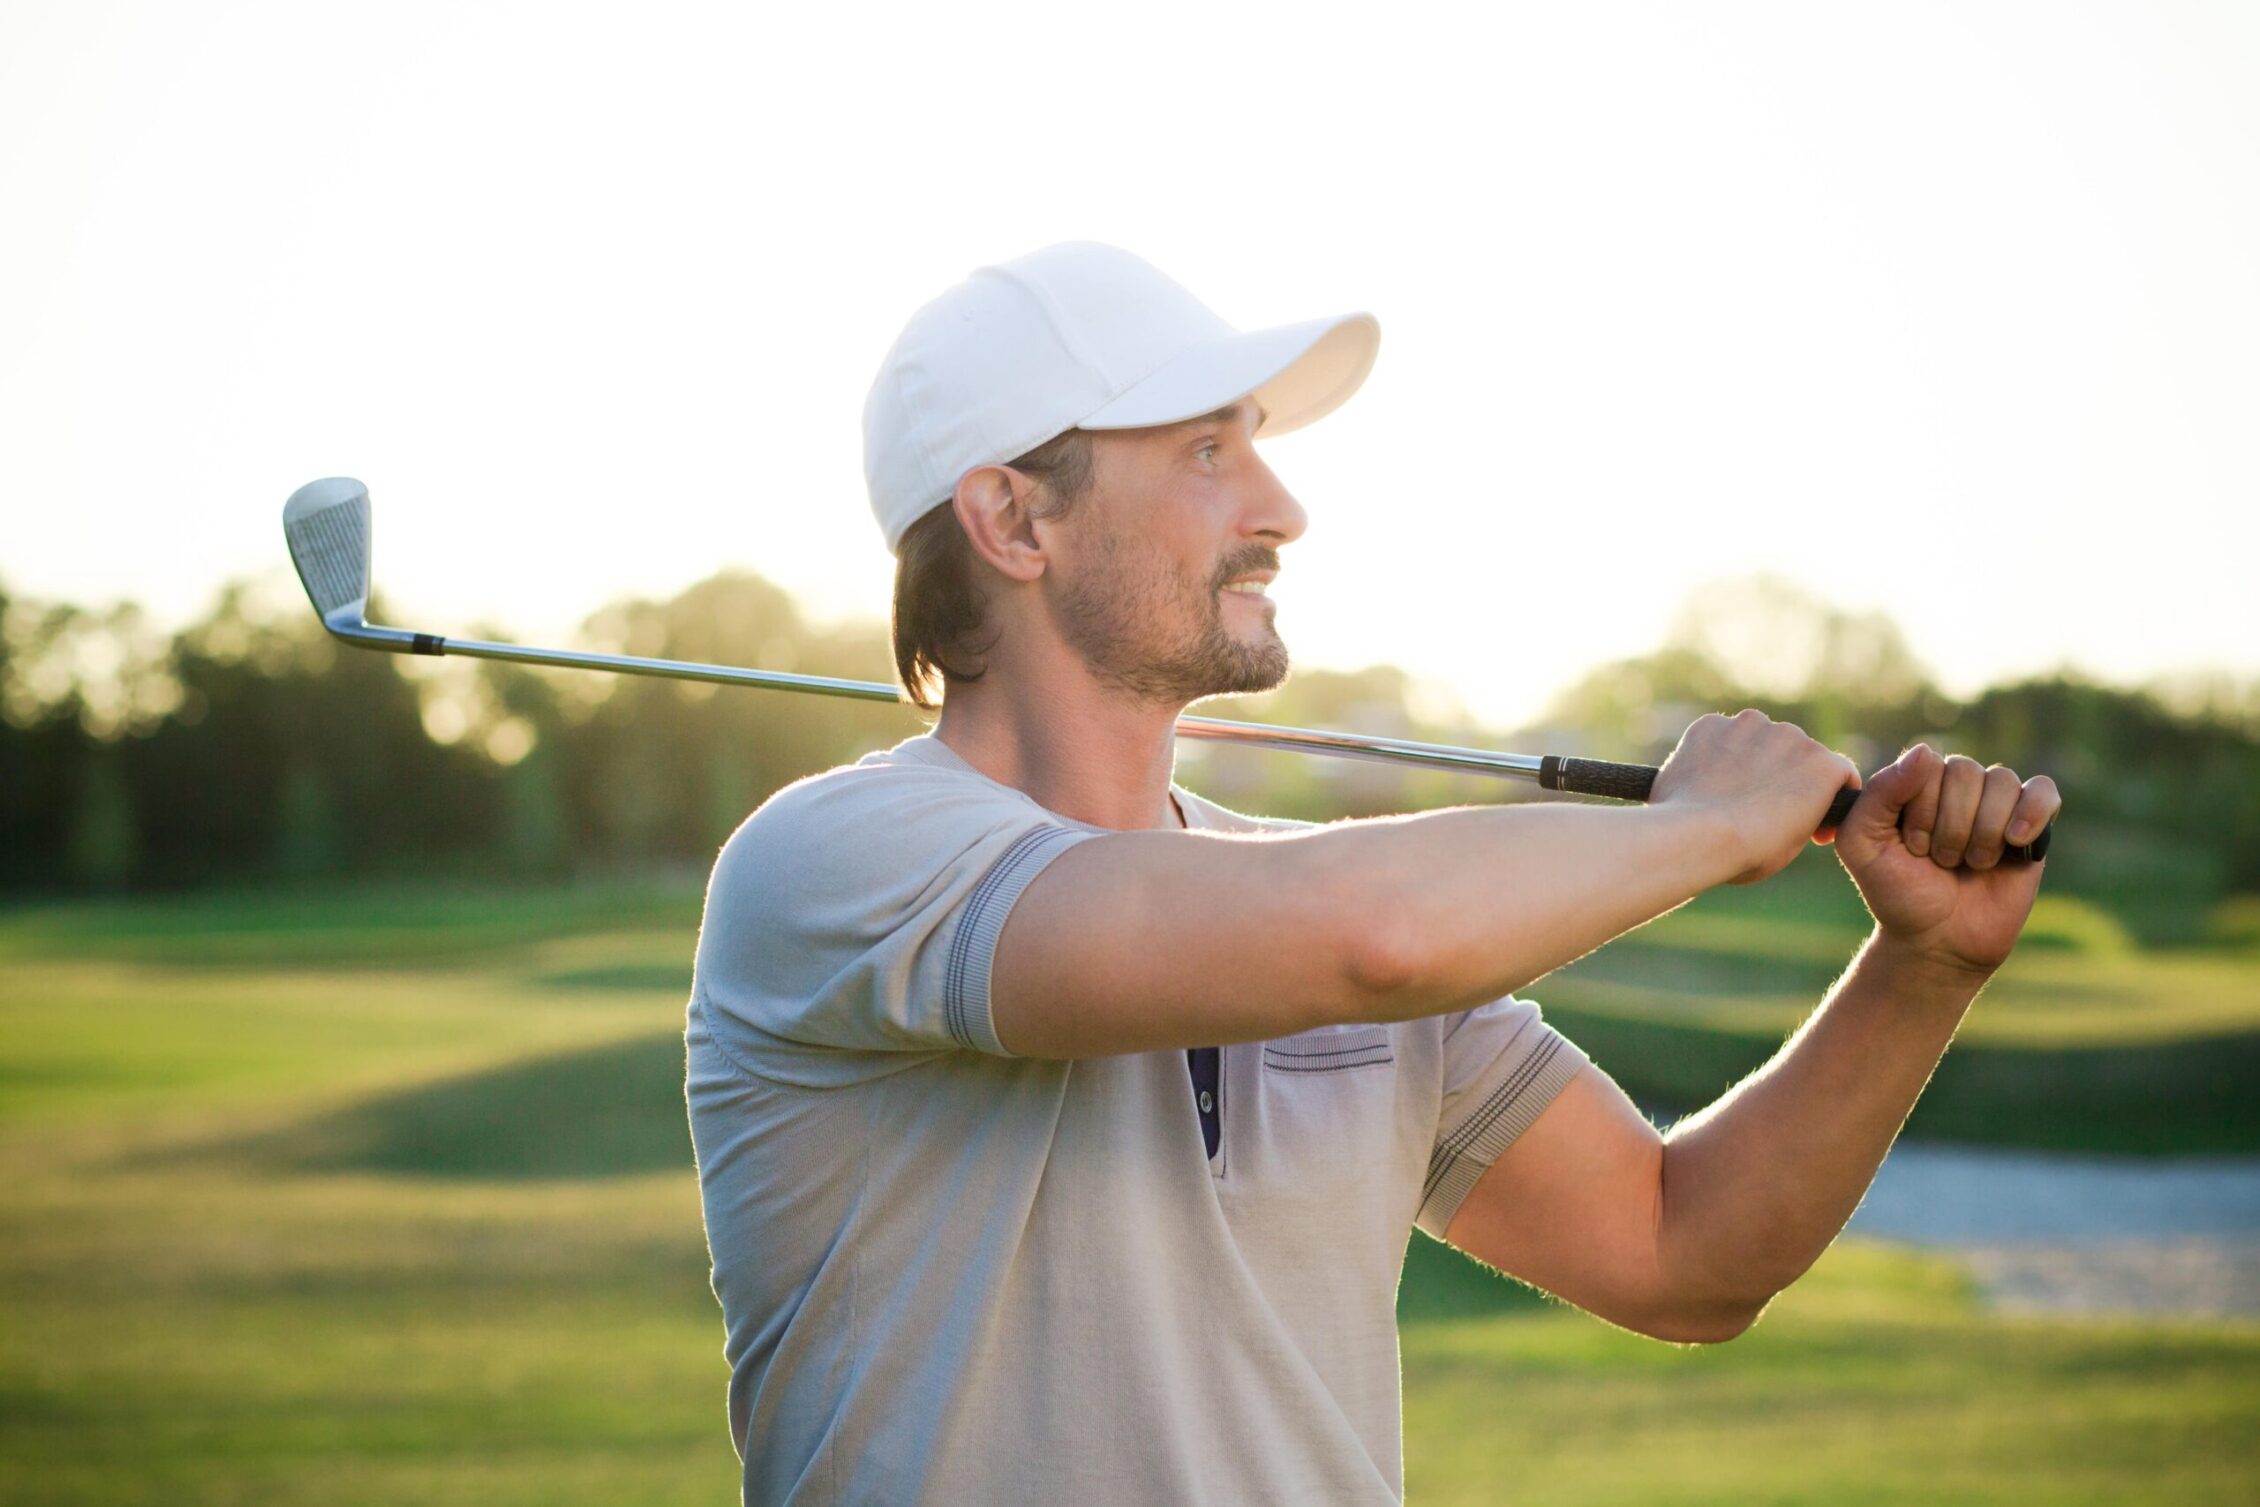 Golf Attire Guidelines for Men – How to Dress on the Course